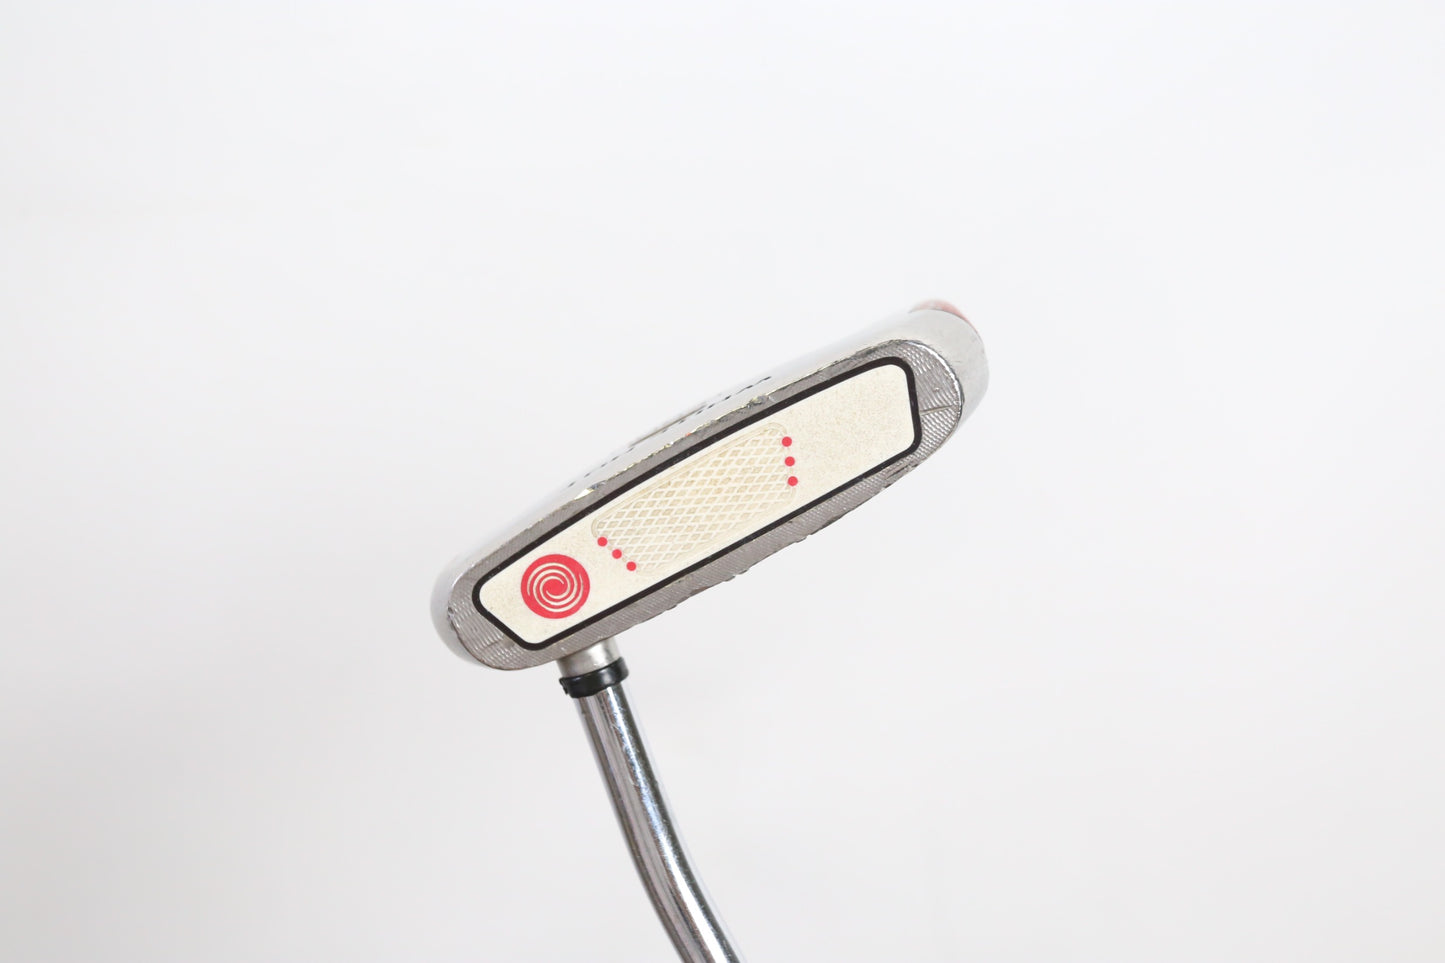 Used Odyssey White Hot XG Teron Putter - Right-Handed - 33 in - Mallet